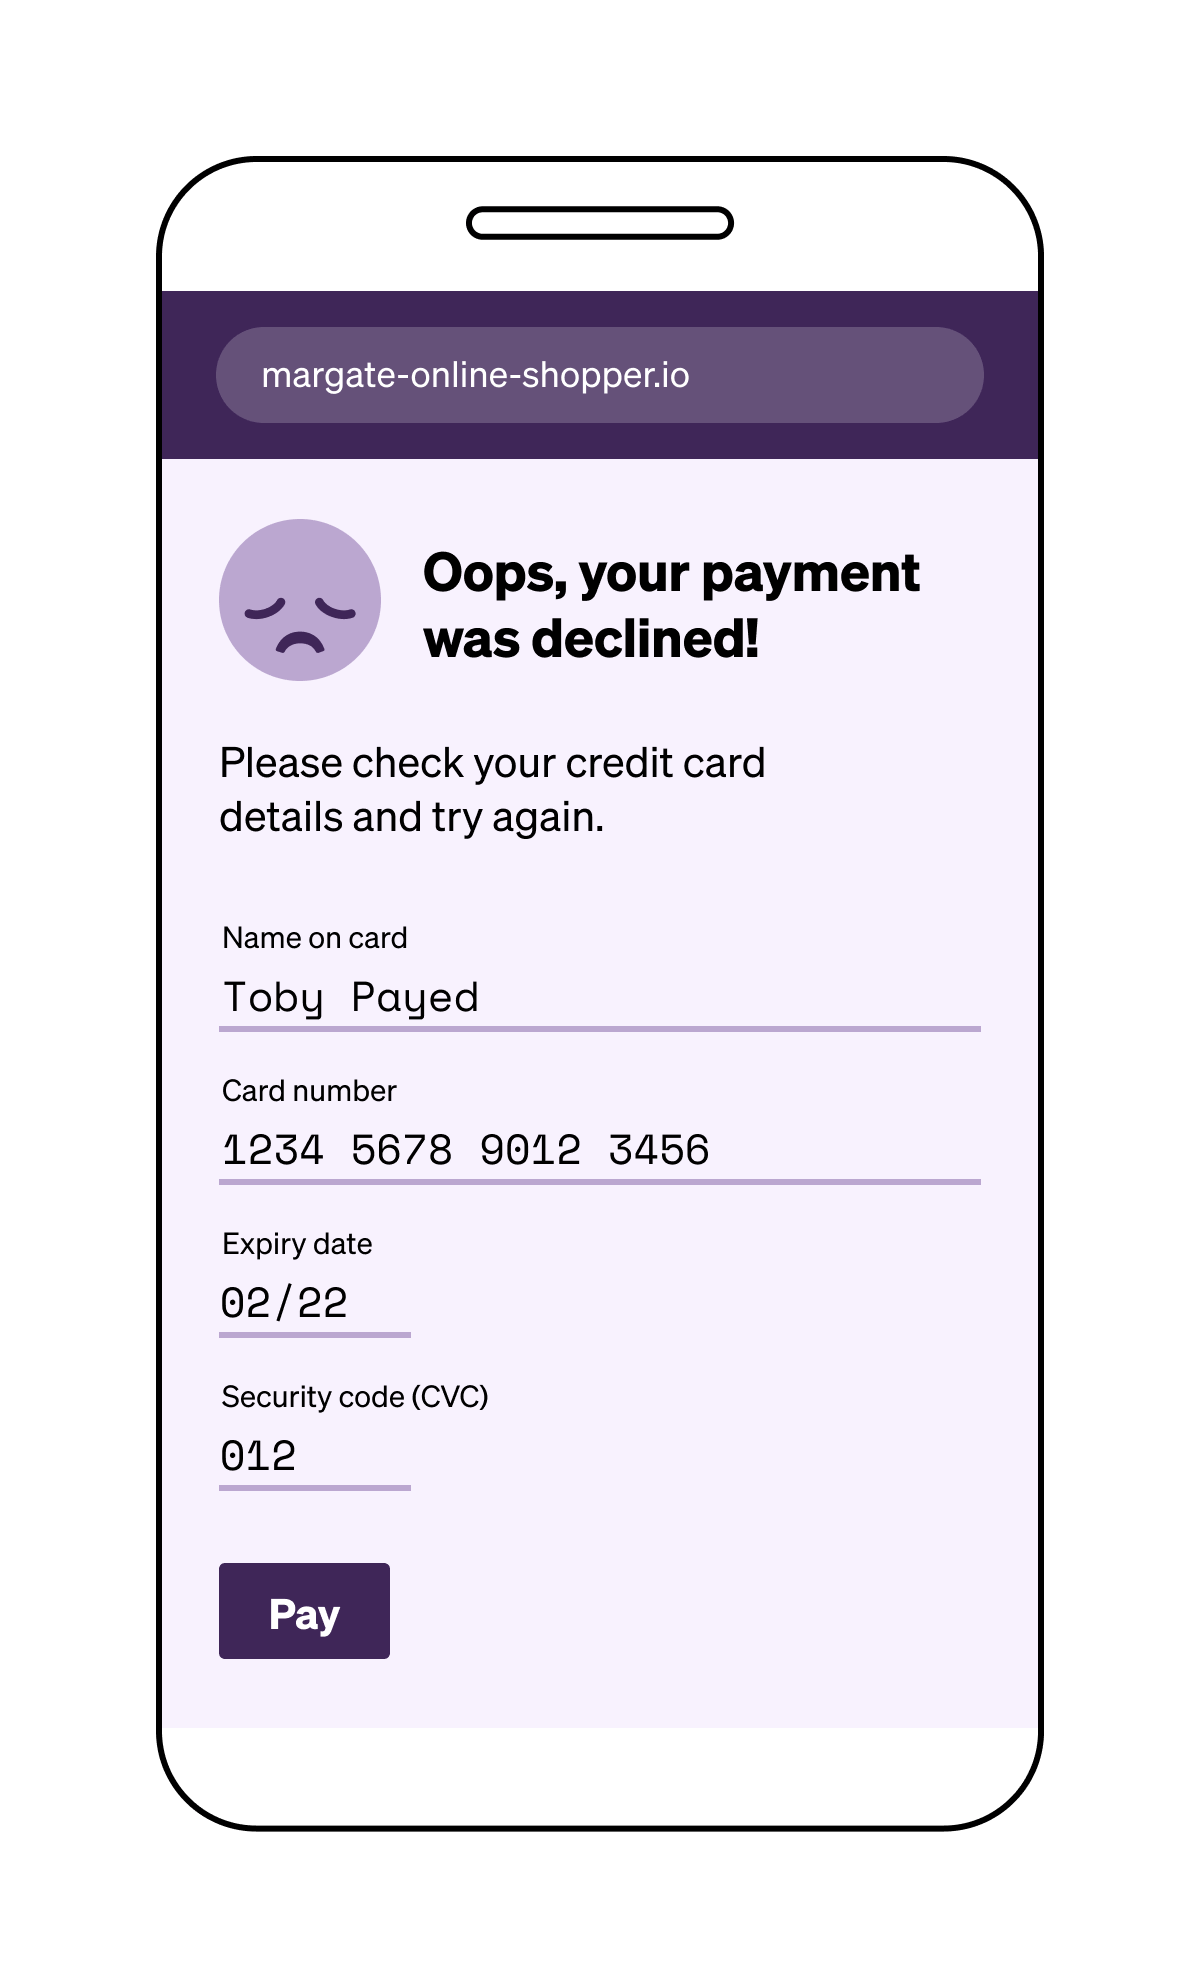 Illustration of checkout screen